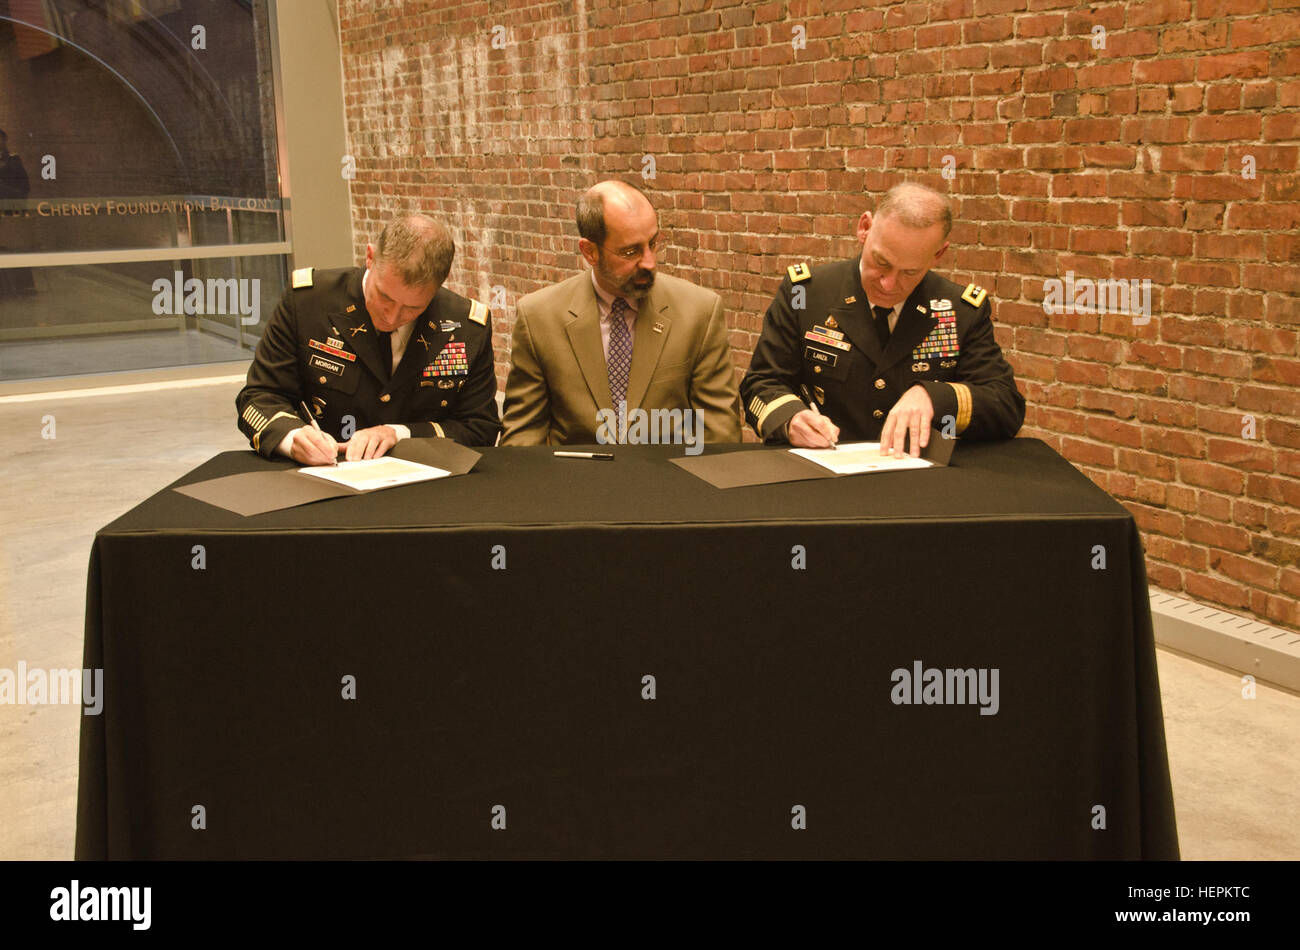 Col. Daniel S. Morgan, commander, Joint Base Lewis-McChord, left, Mark A. Pagano, chancellor, University of Washington Tacoma, center, and Lt. Gen. Stephen R. Lanza, commanding general, I Corps, JBLM, right, come together to sign partnership resolutions at the University of Washington Tacoma, Oct. 29, 2015. The partnership resolution allows for the military and the UW-T to work together to improve life in the South Sound region for all residents. (U.S. Army photo by Sgt. Jasmine Higgins, 28th Public Affairs Detachment) Resolution 151030-A-HS859-997 Stock Photo